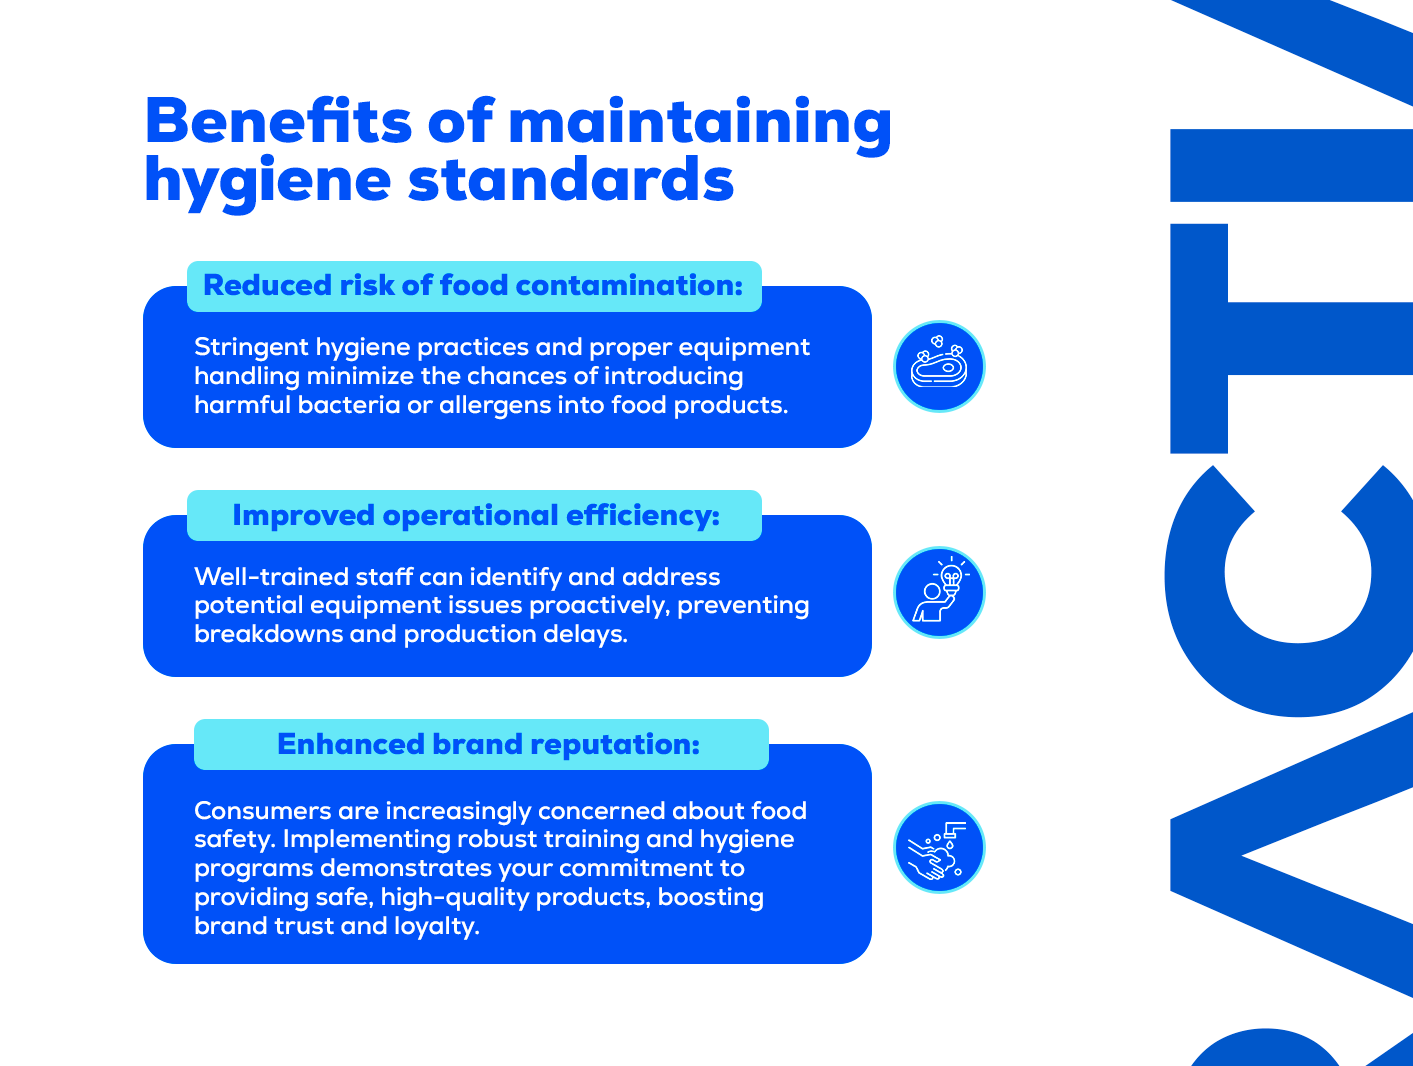 Benefits of maintaining hygiene standards in food maintenance